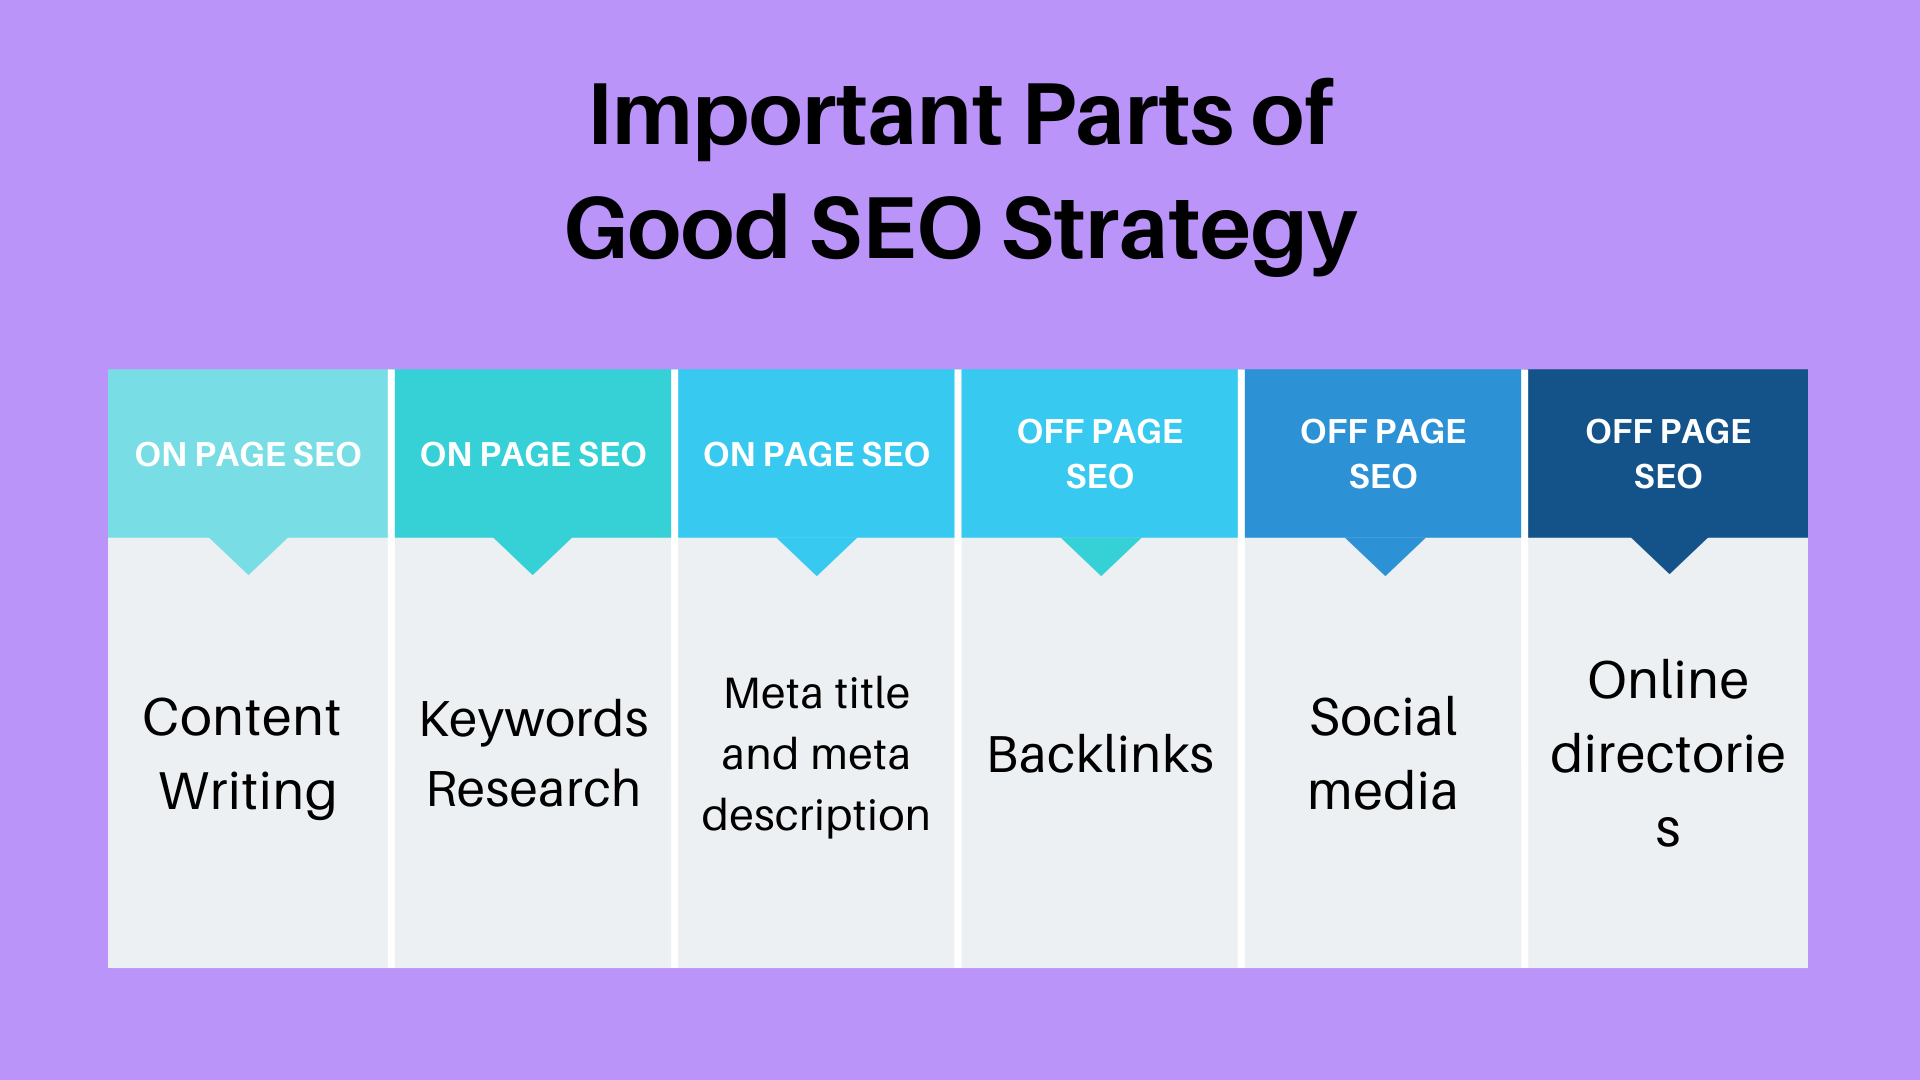 Important Parts of Good SEO Strategy